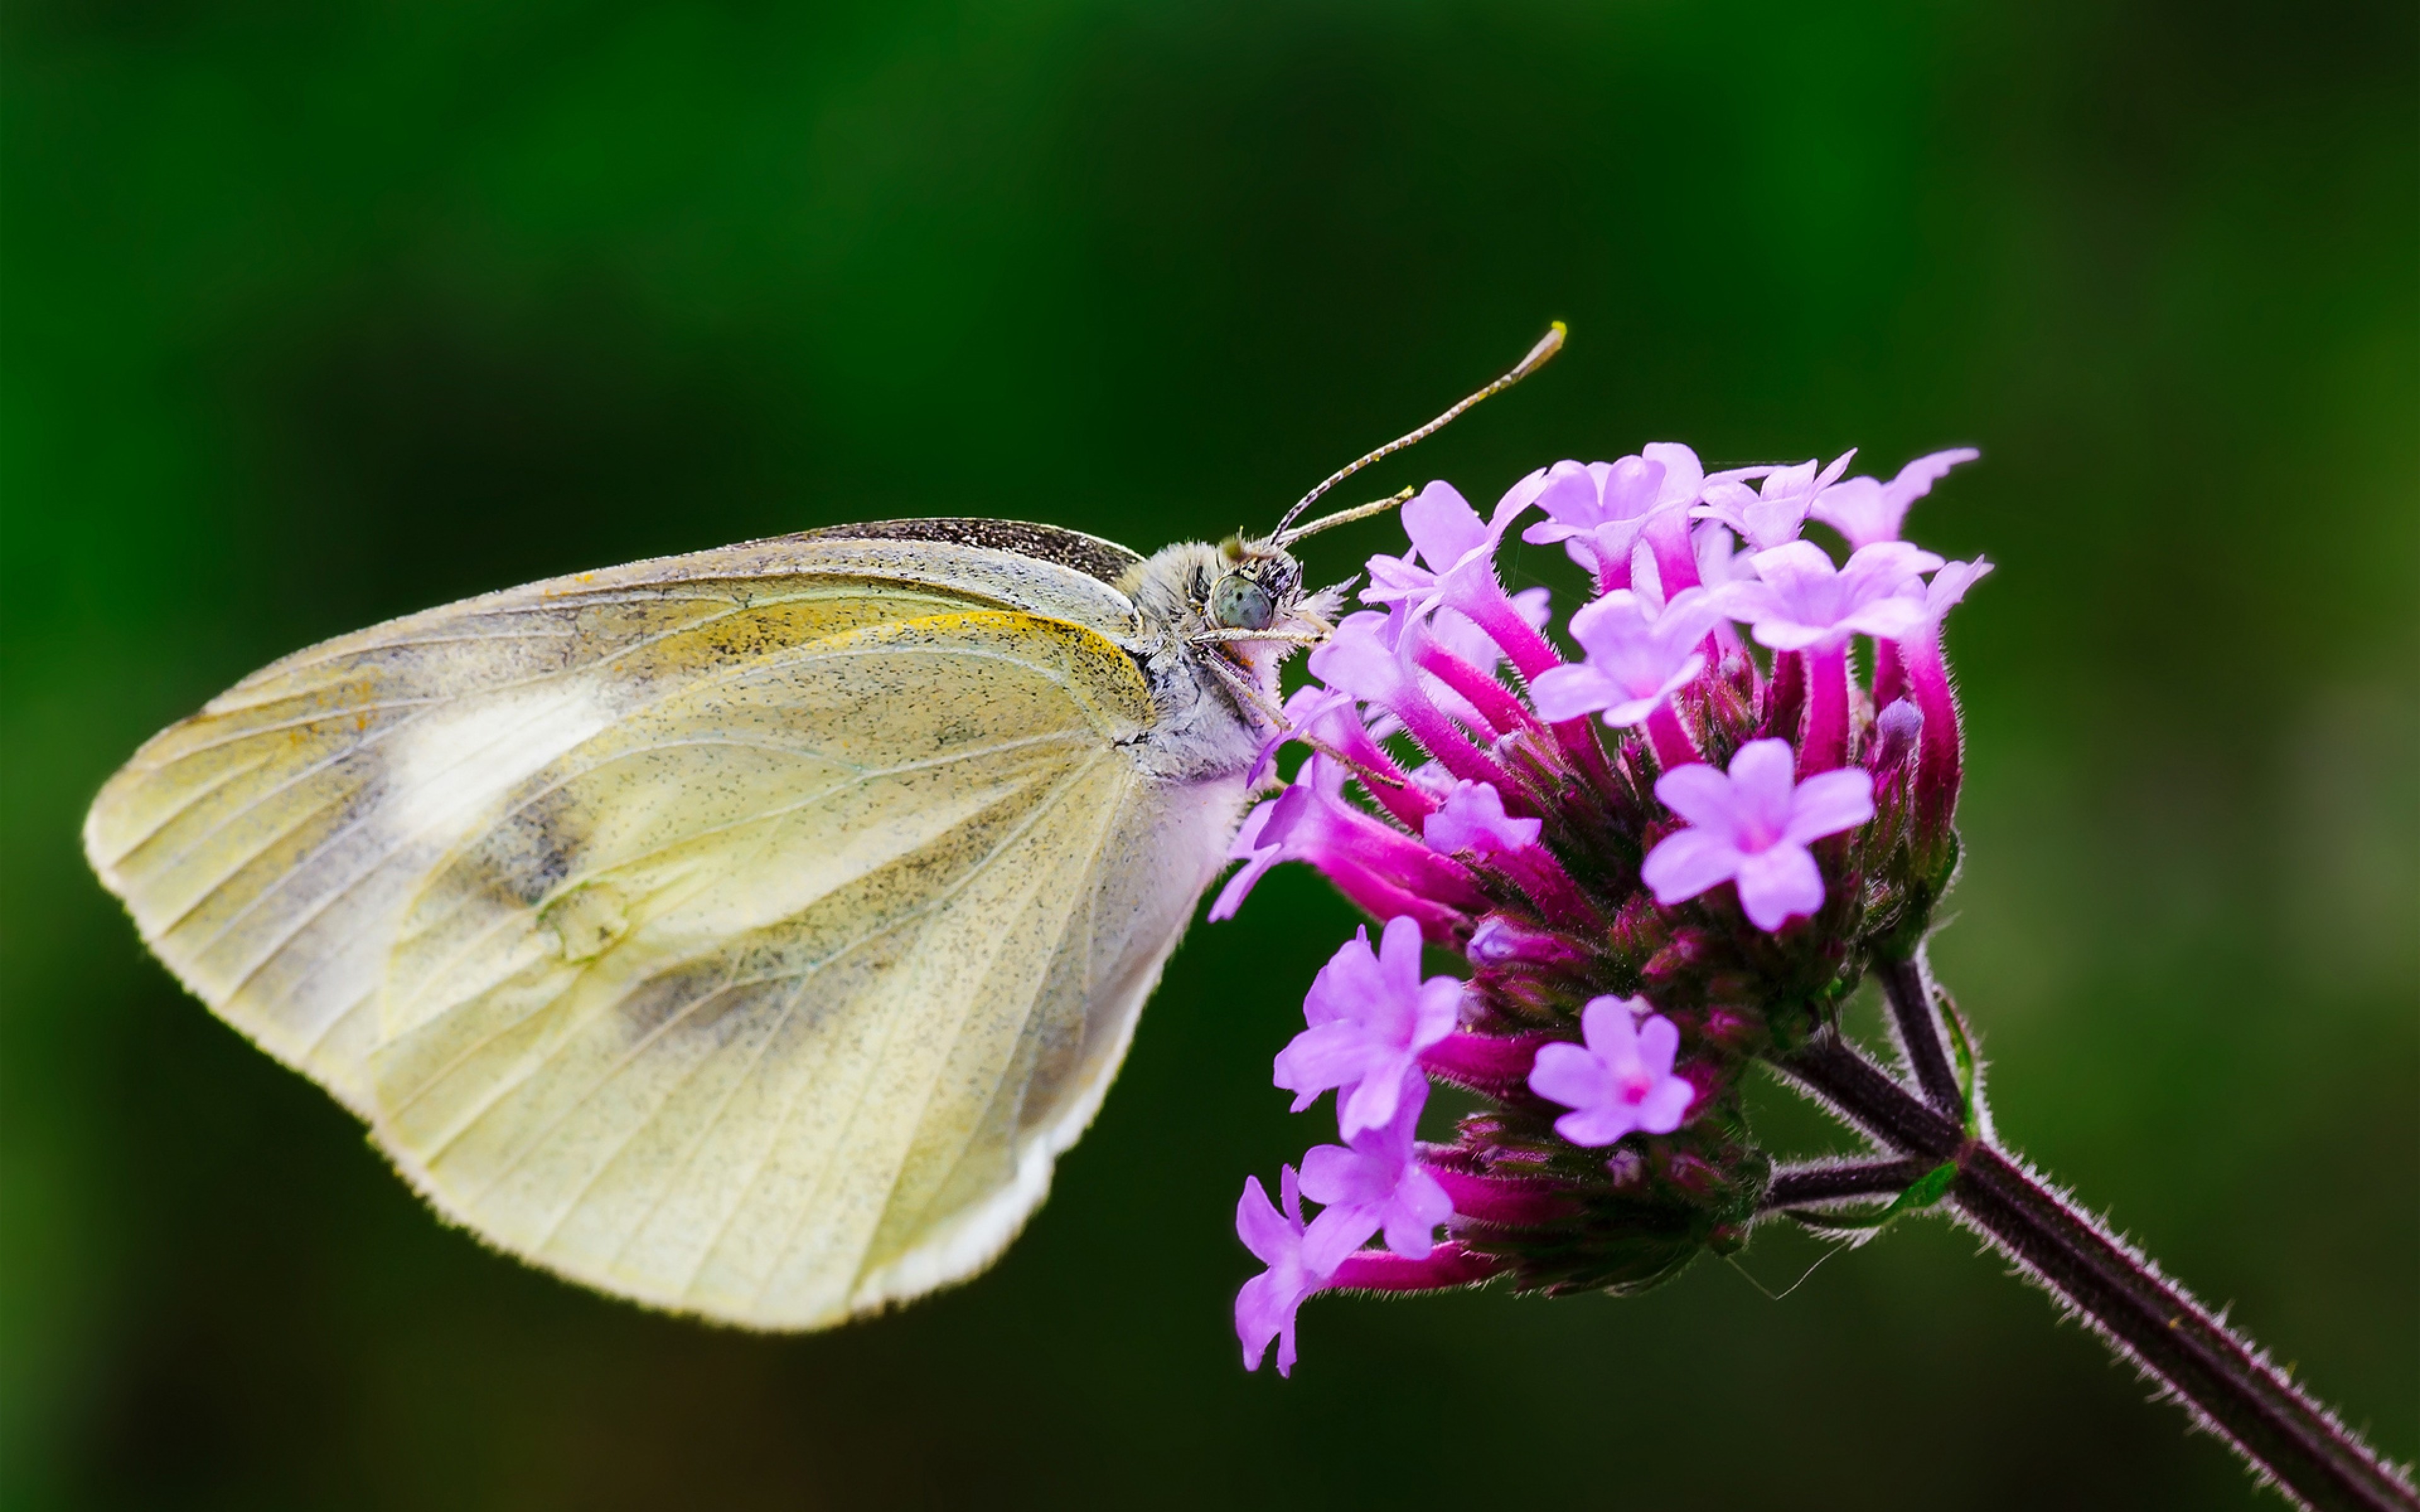 General 3840x2400 nature macro flowers butterfly animals insect closeup green background pink flowers